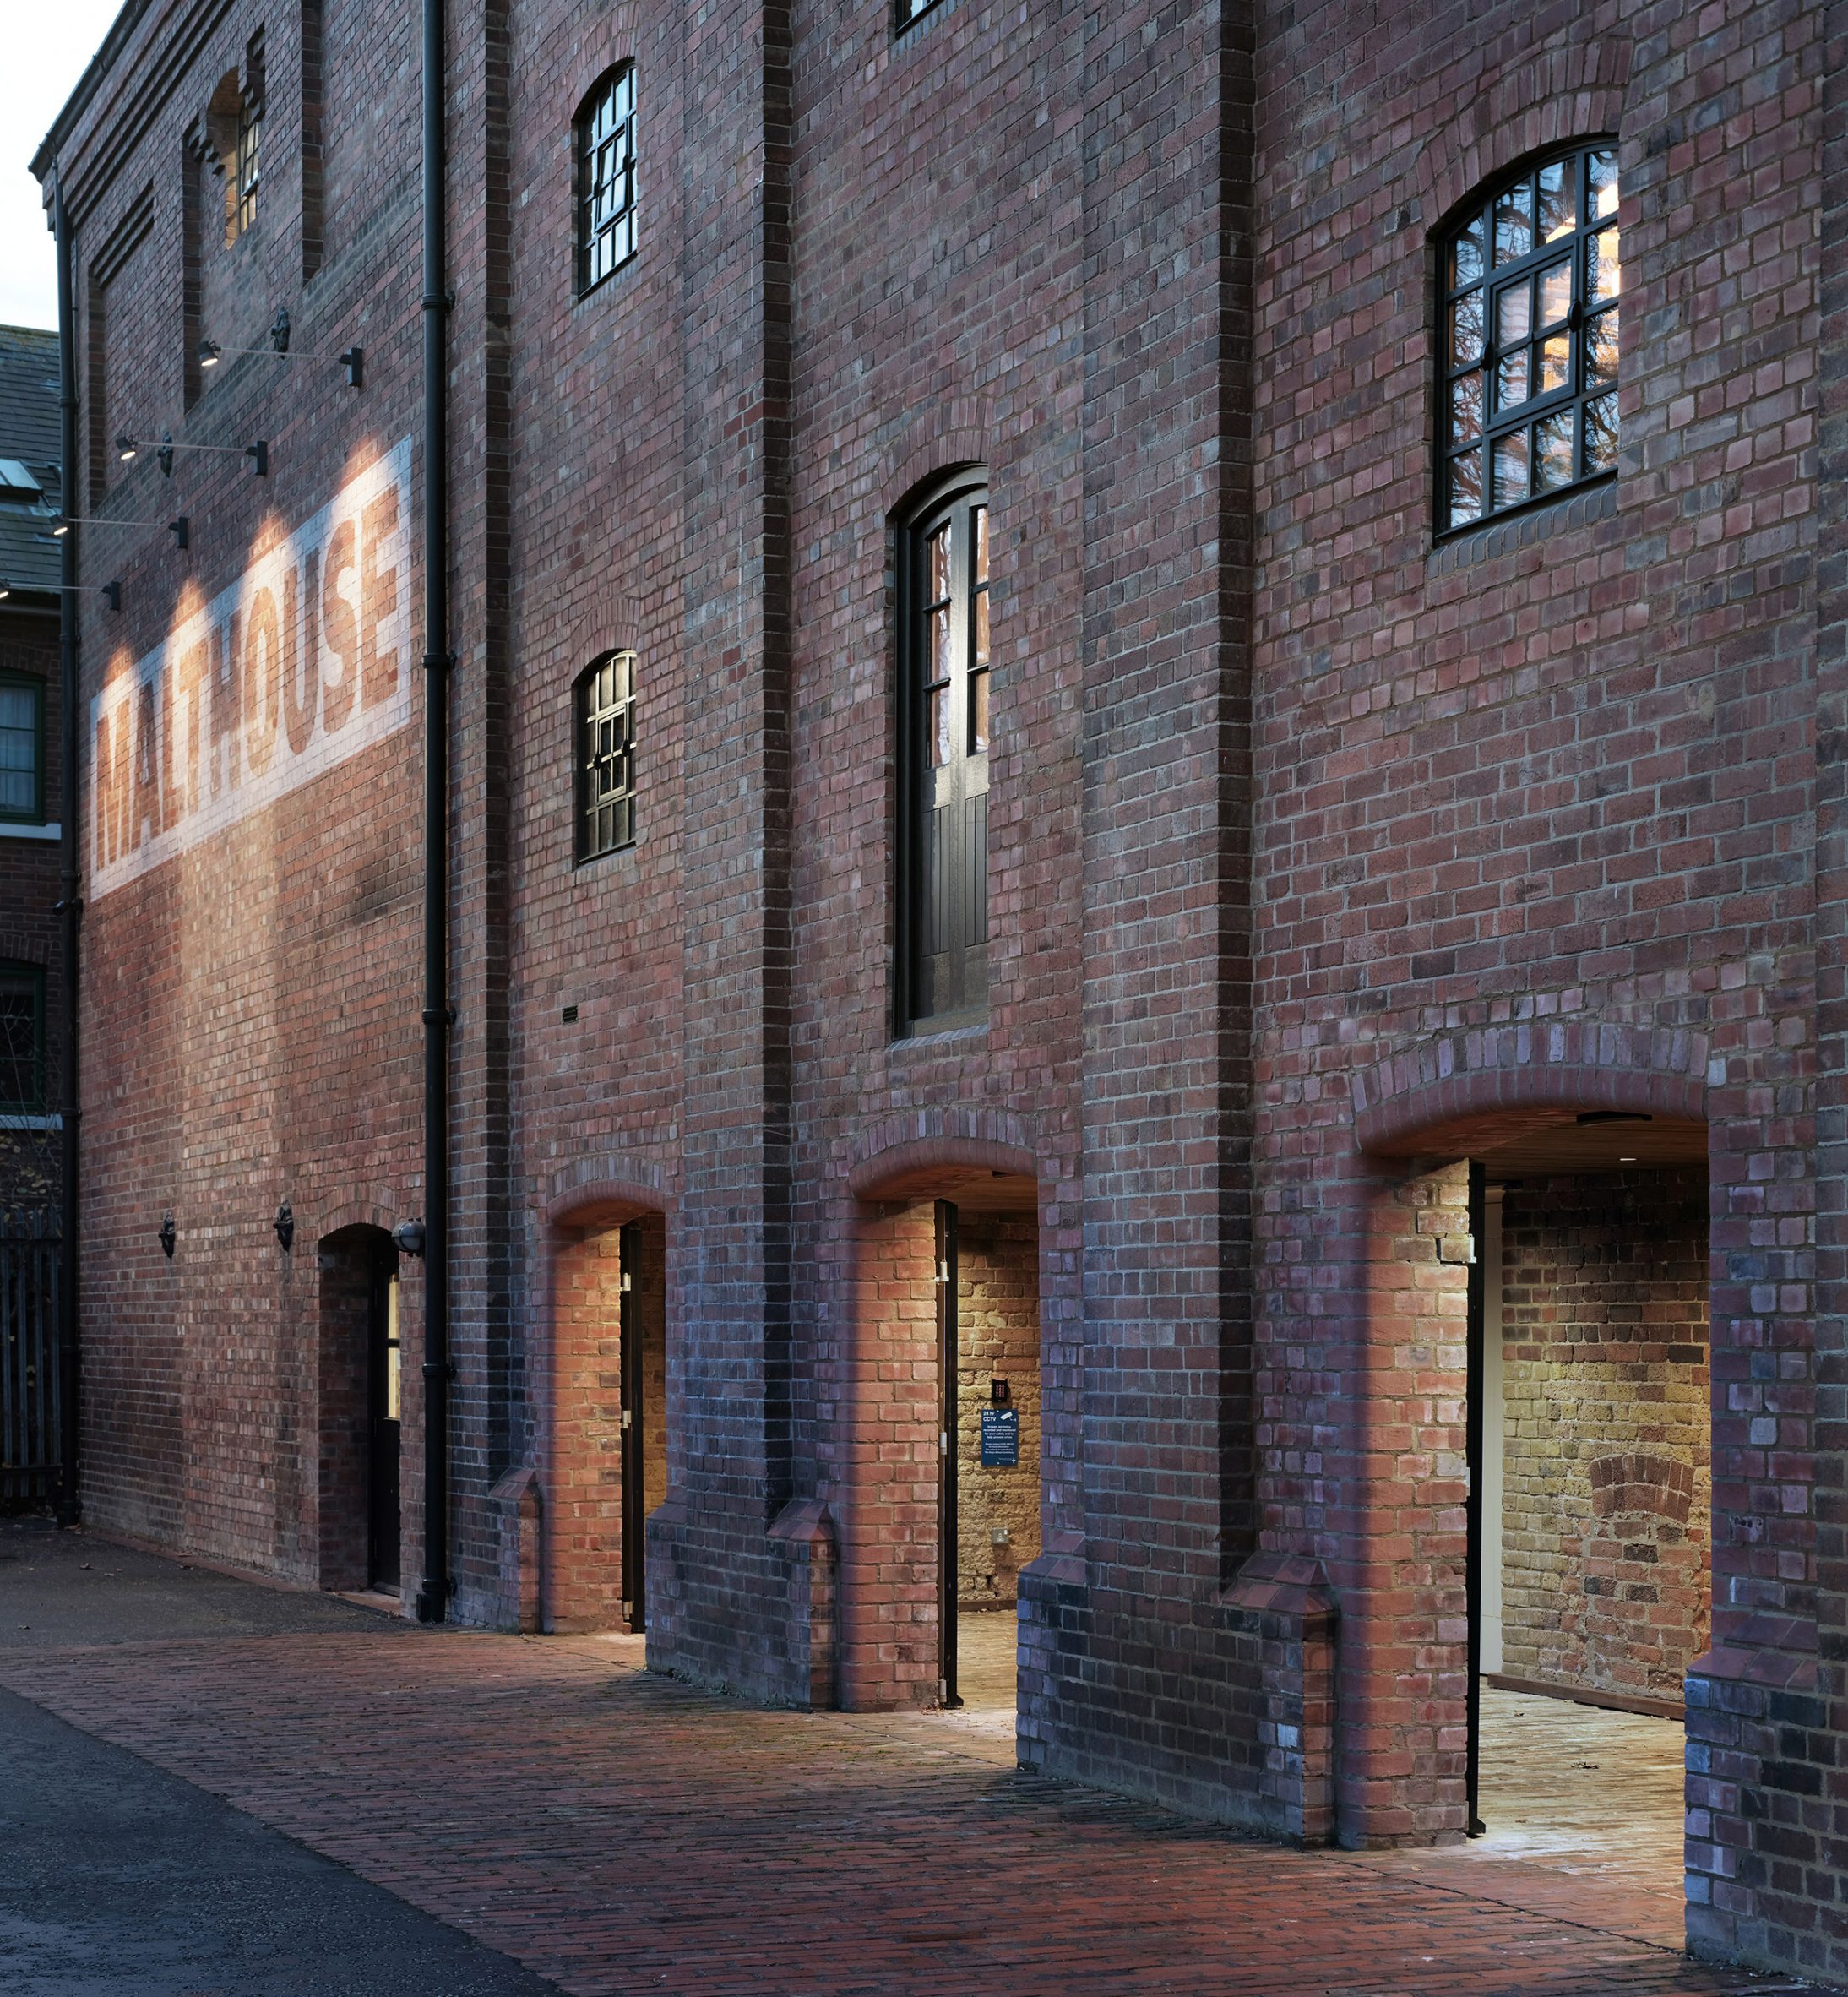 The exterior of The Malthouse has a typical 19th century industrial look